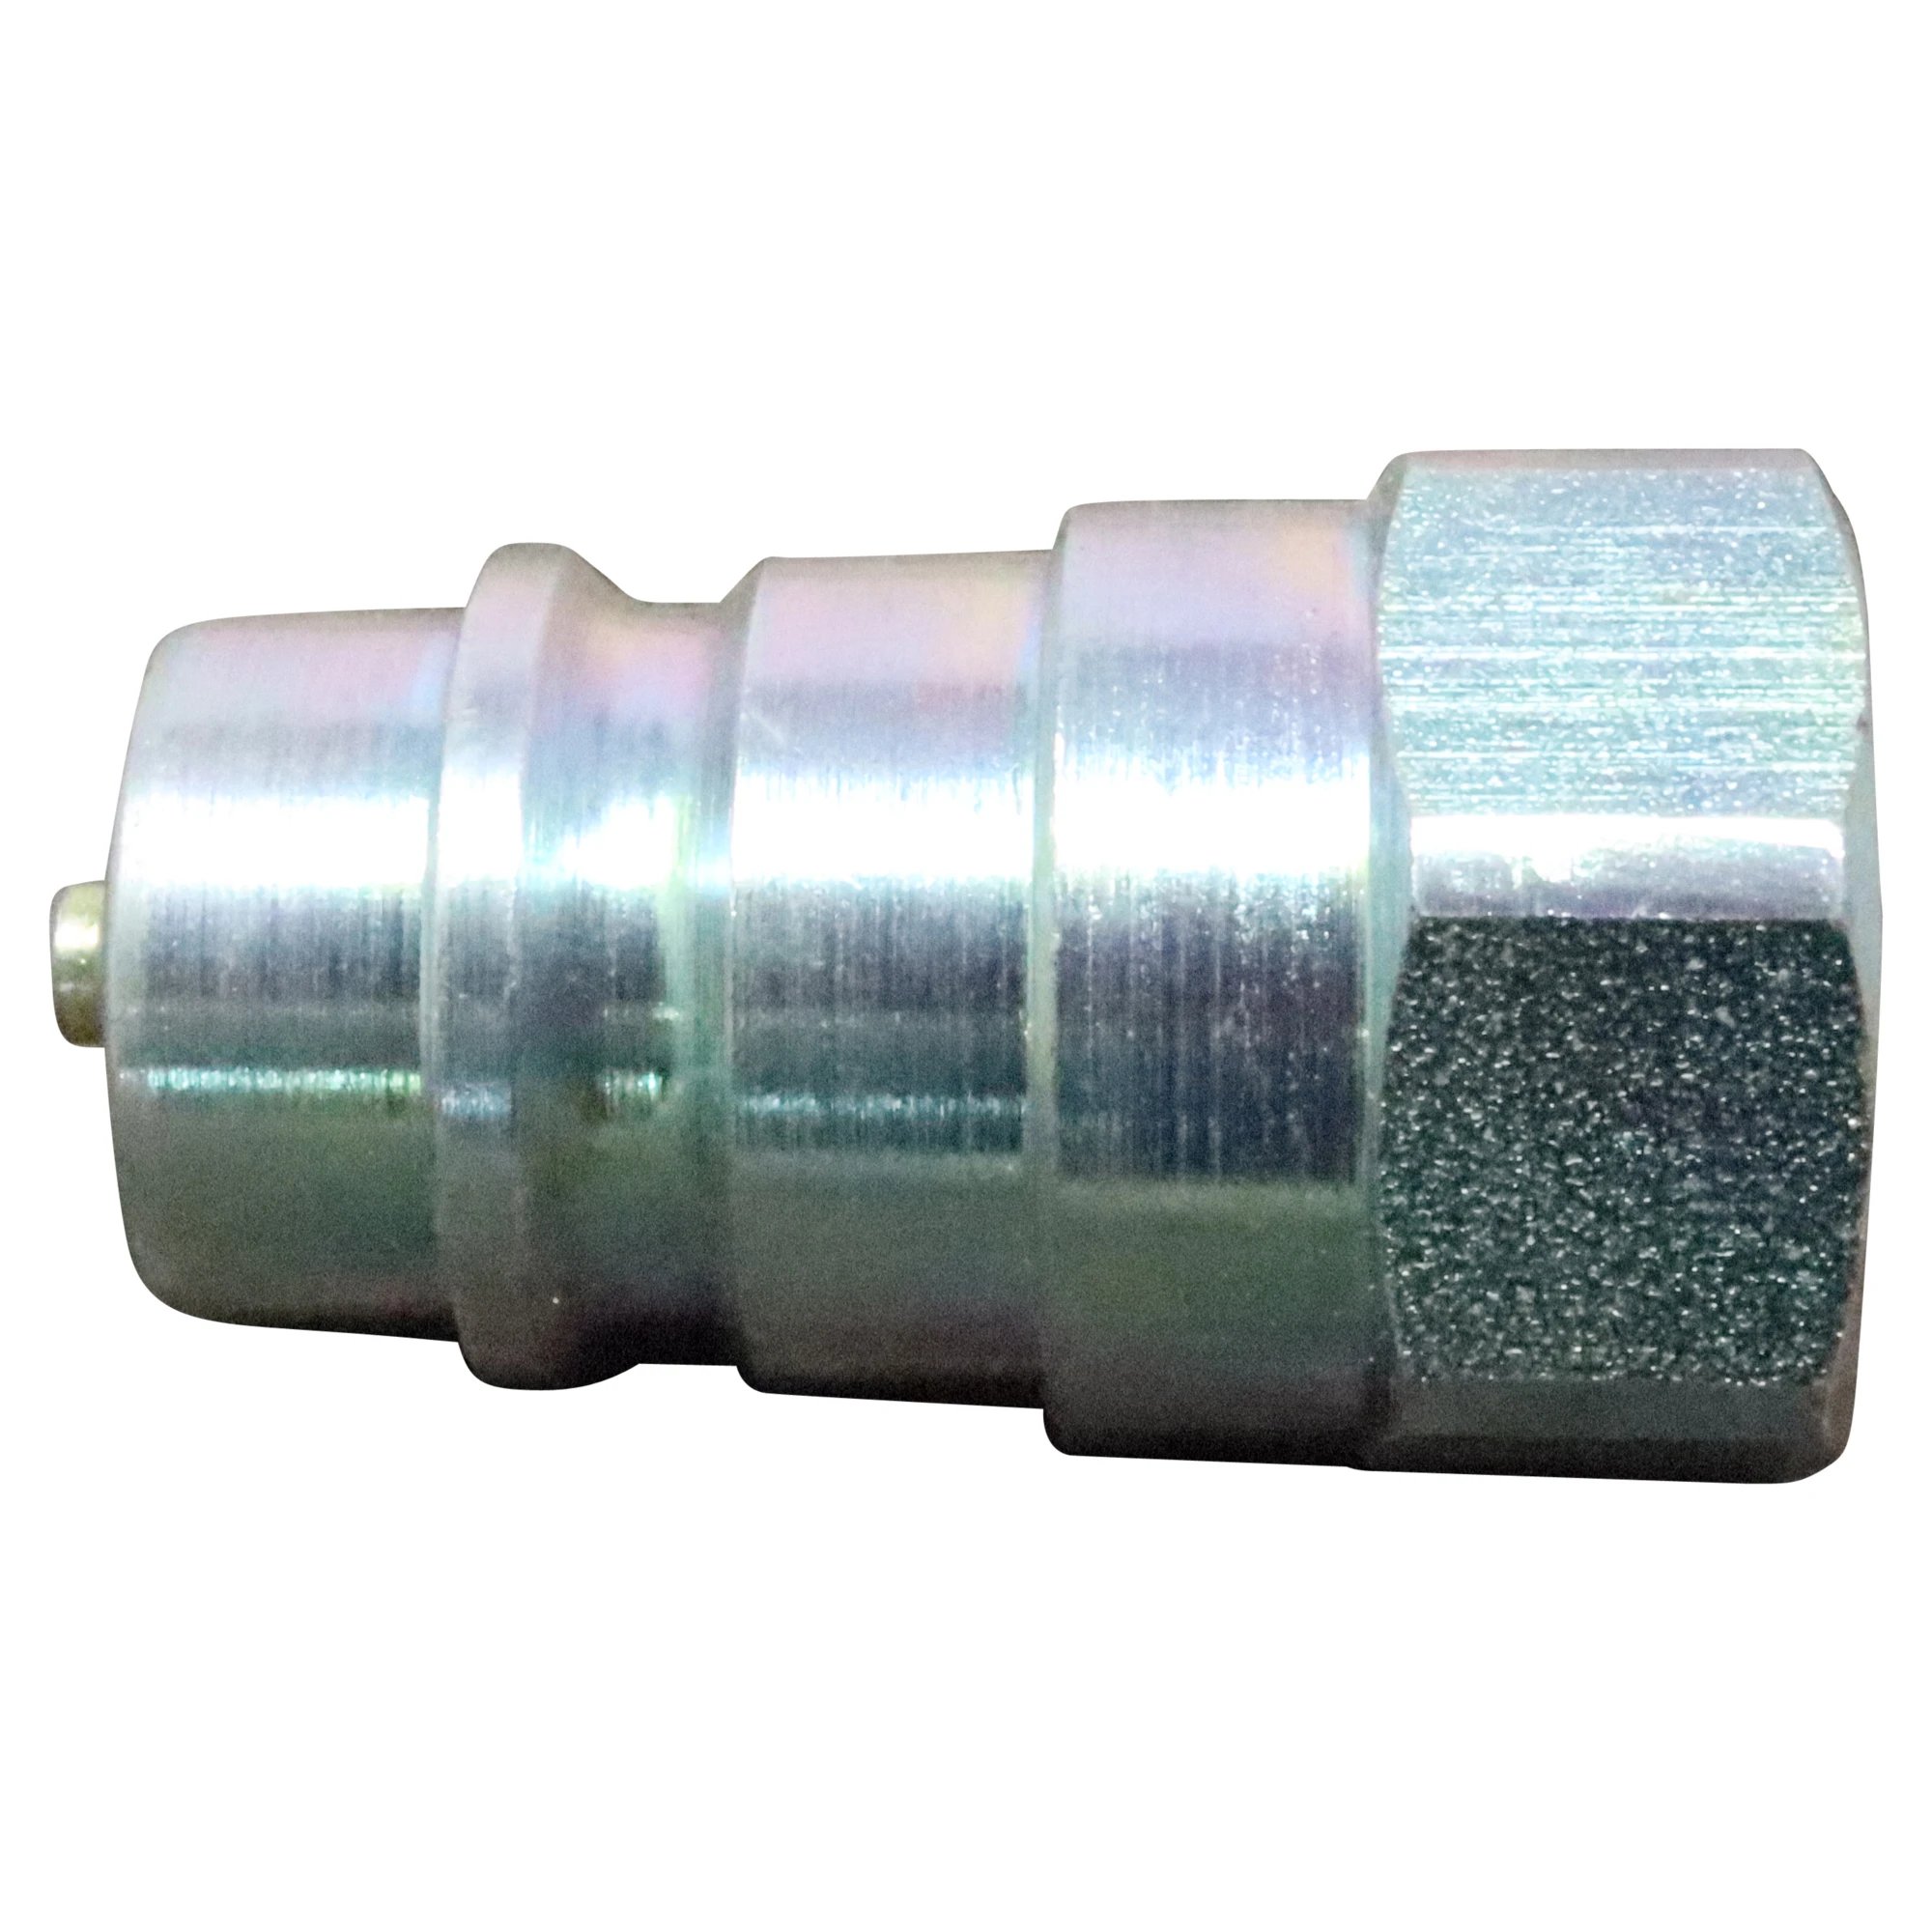 Galbreath™ Coupler, 1/2" Male Quick Disconnect Uses 4762 Dust Cap